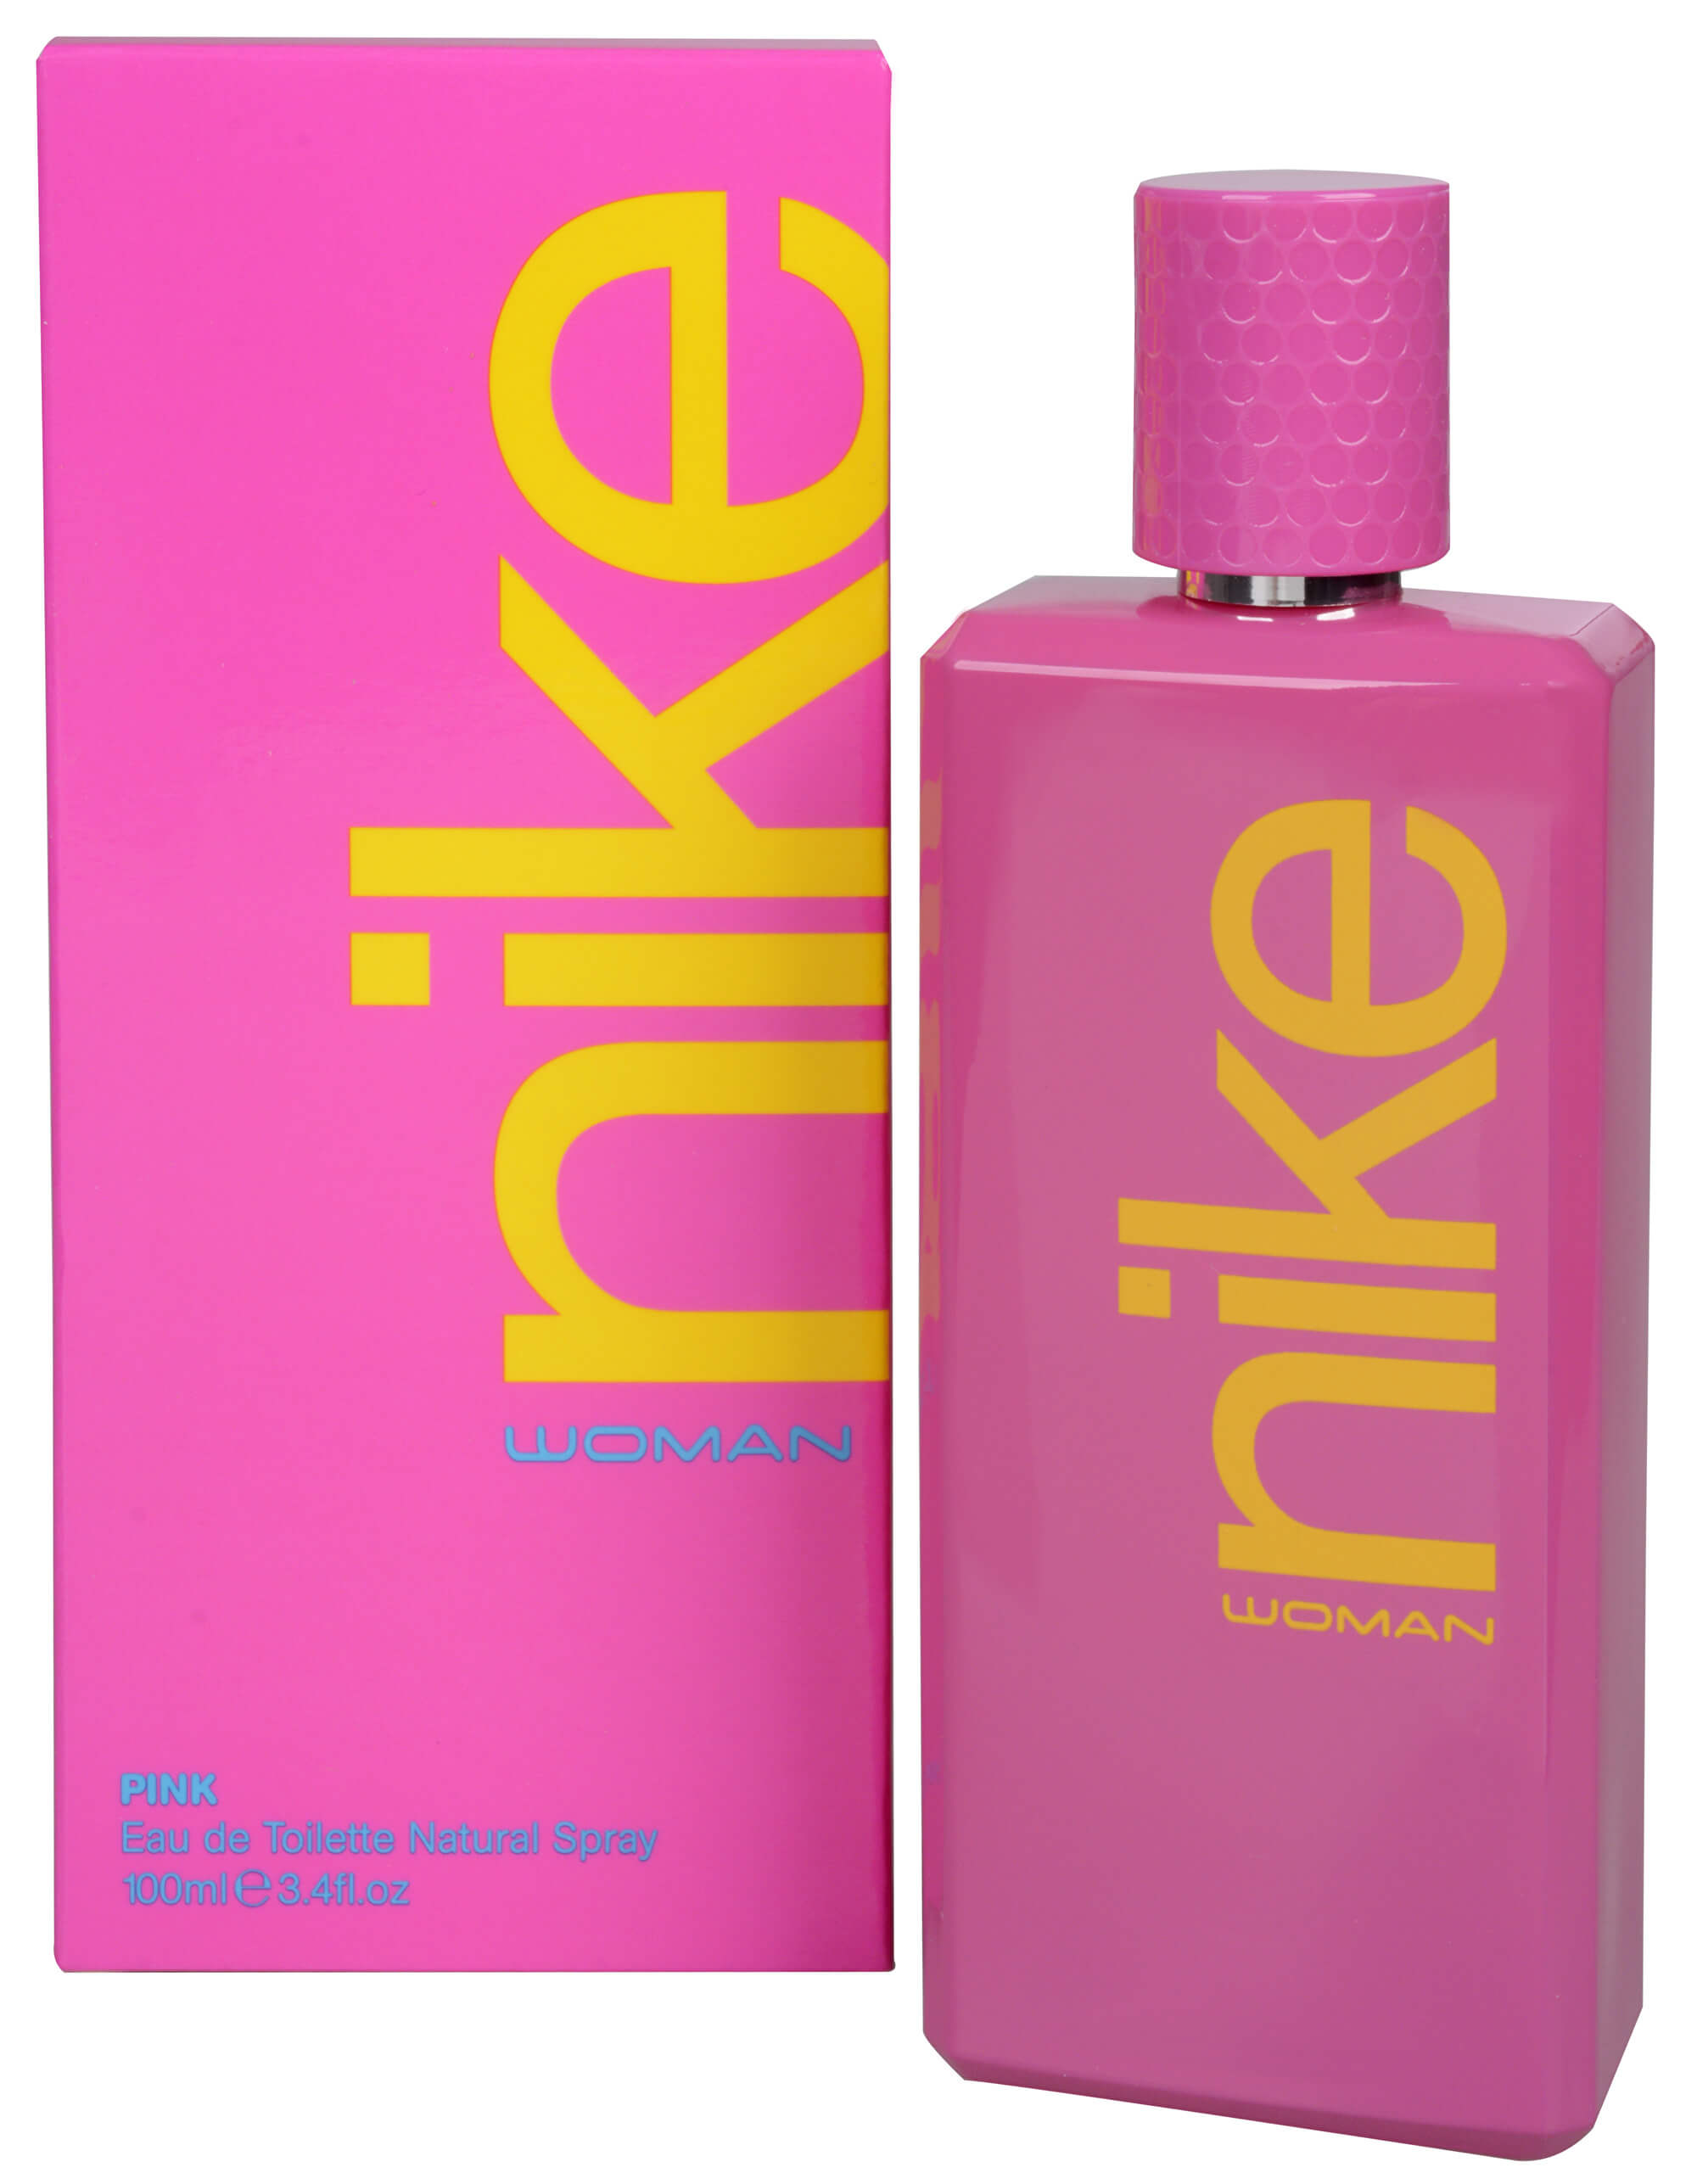 Nike Pink Woman - EDT 100 ml